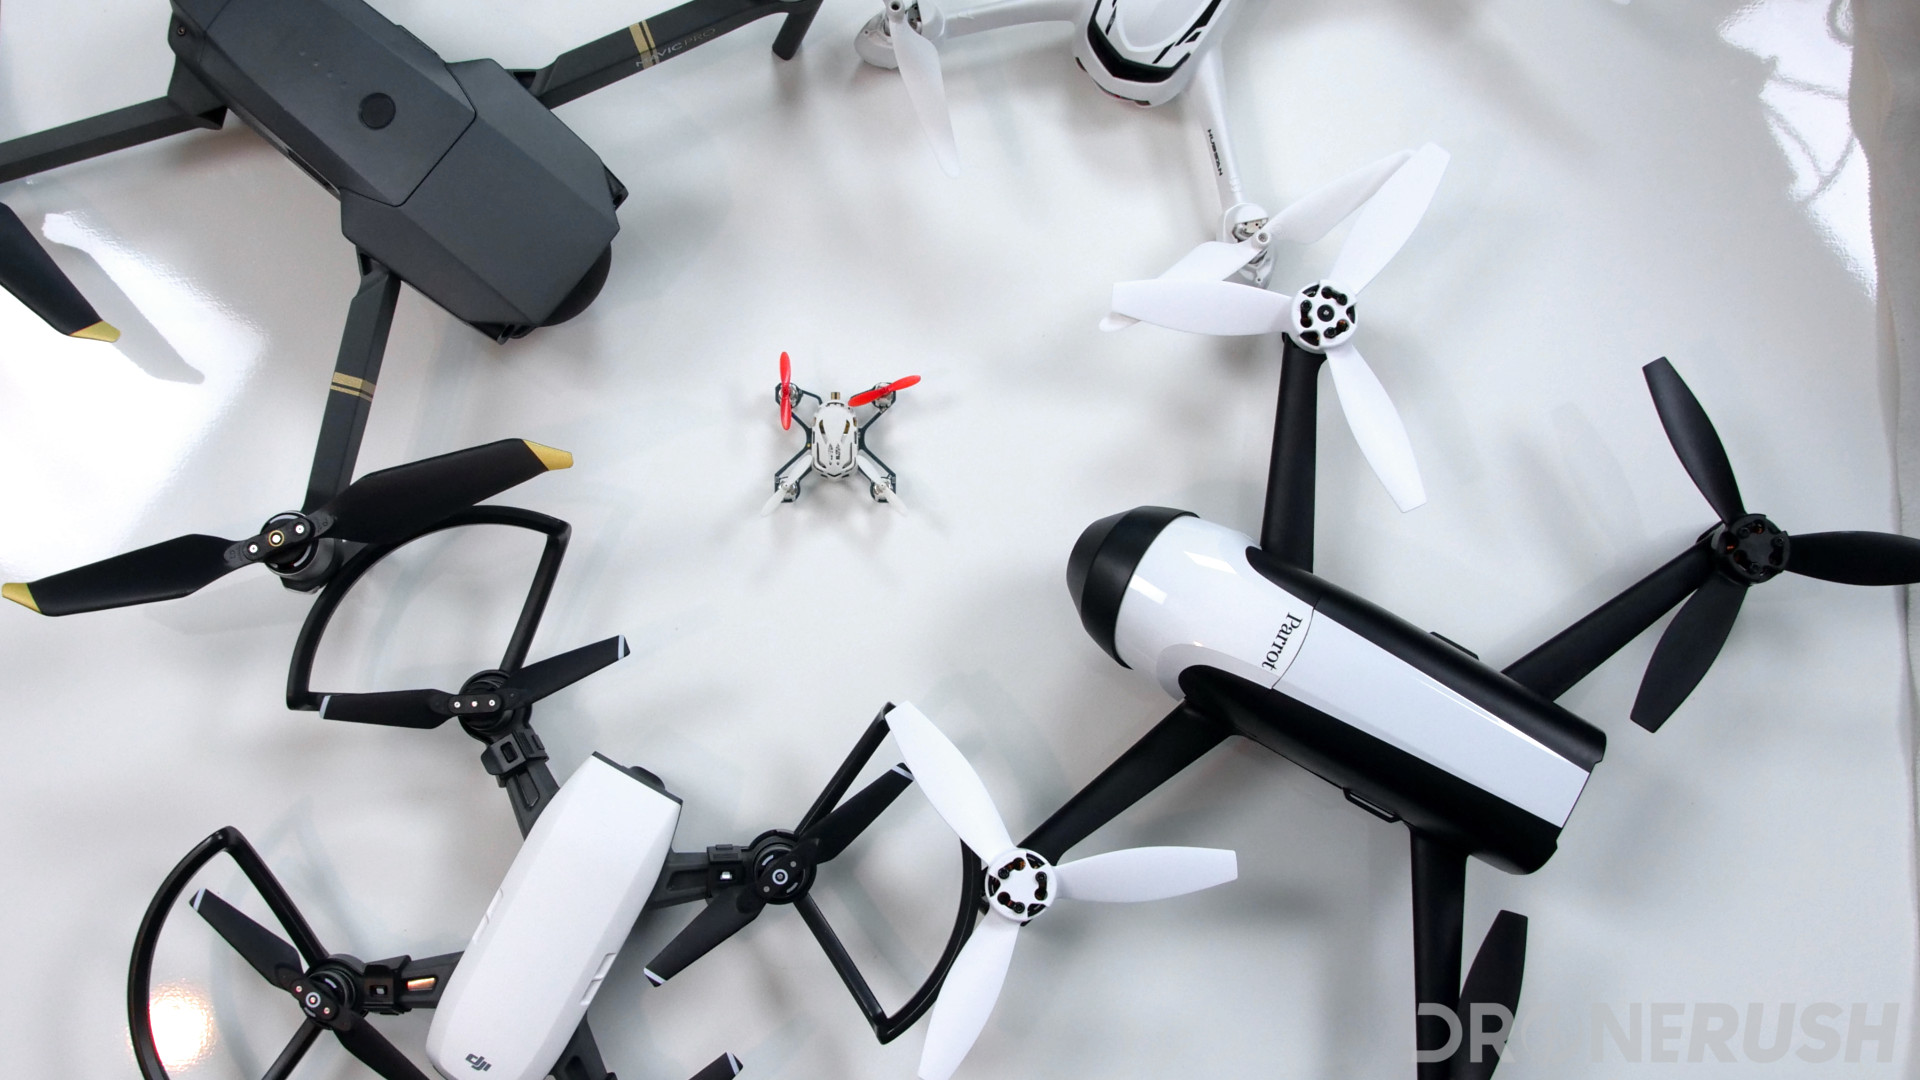 what are the best drone brands